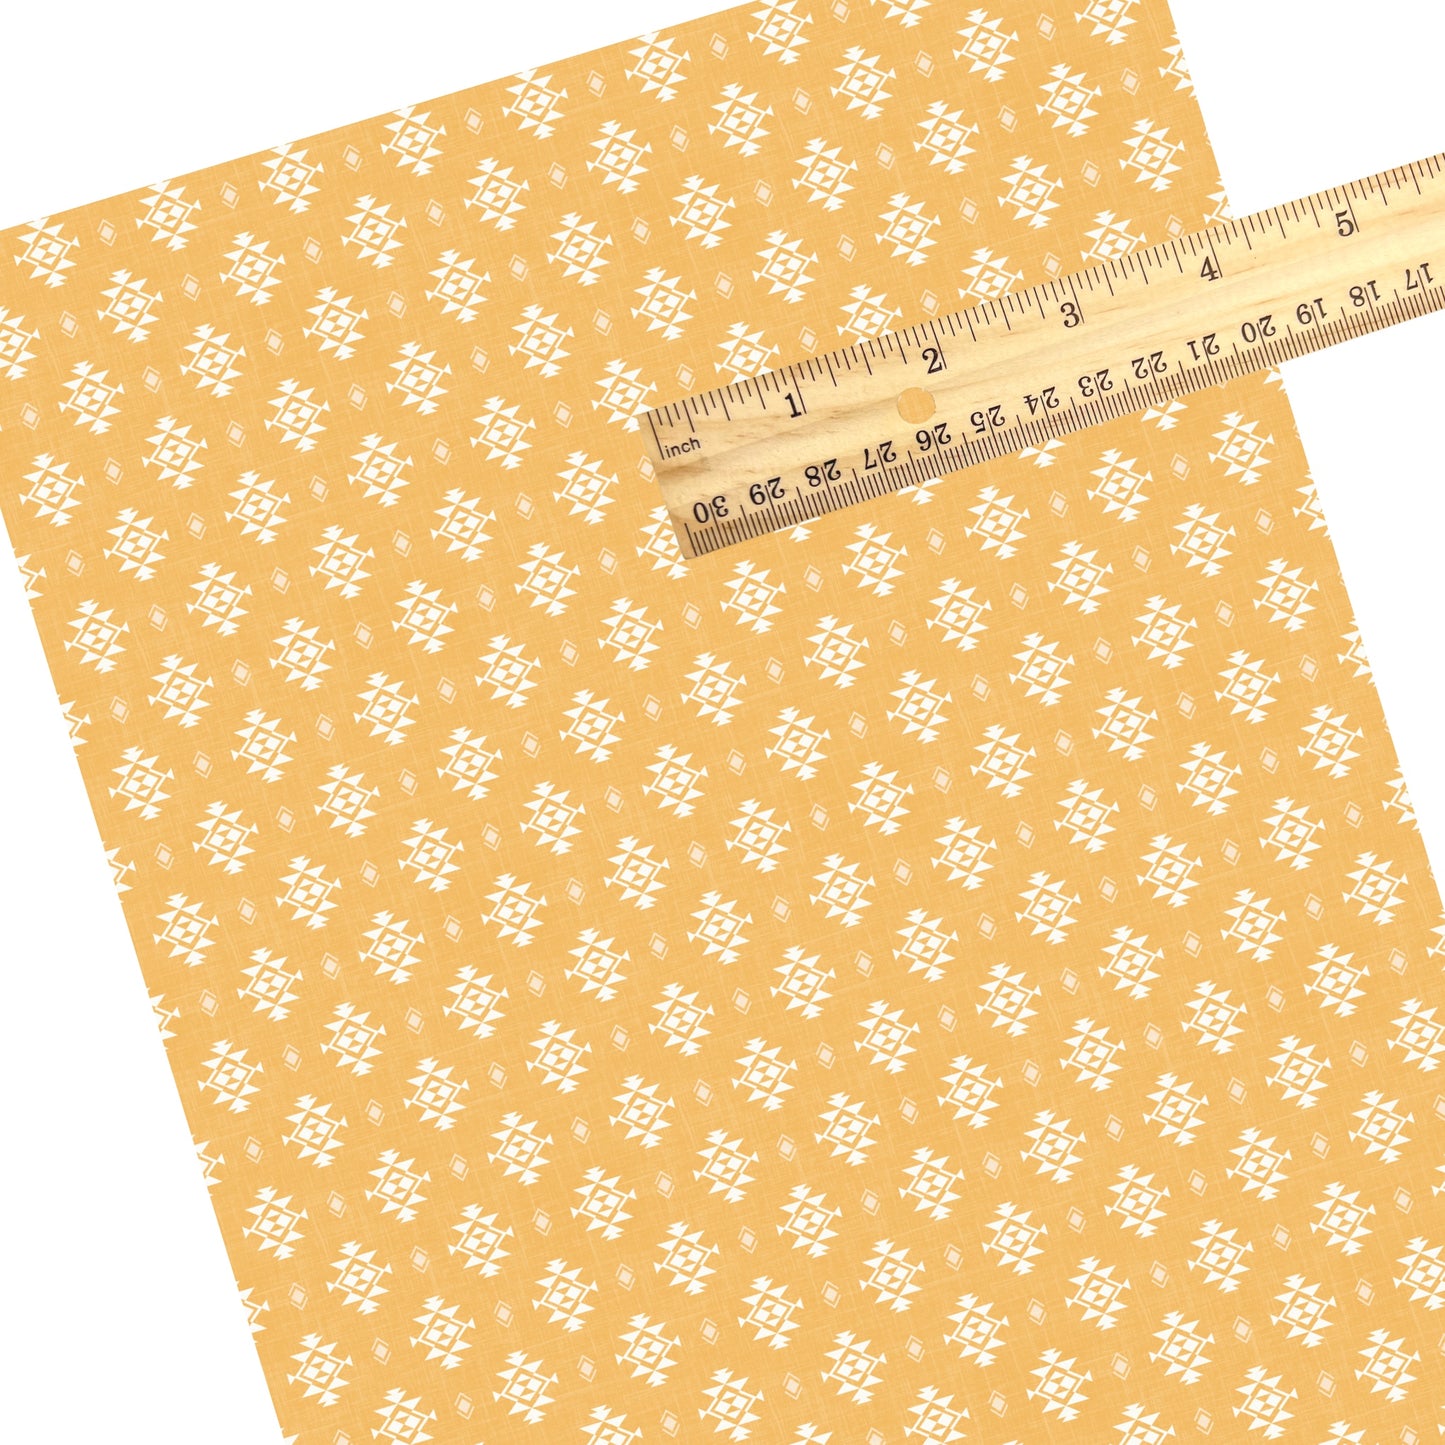 These summer faux leather sheets contain the following design elements: western aztec pattern on honey. Our CPSIA compliant faux leather sheets or rolls can be used for all types of crafting projects.